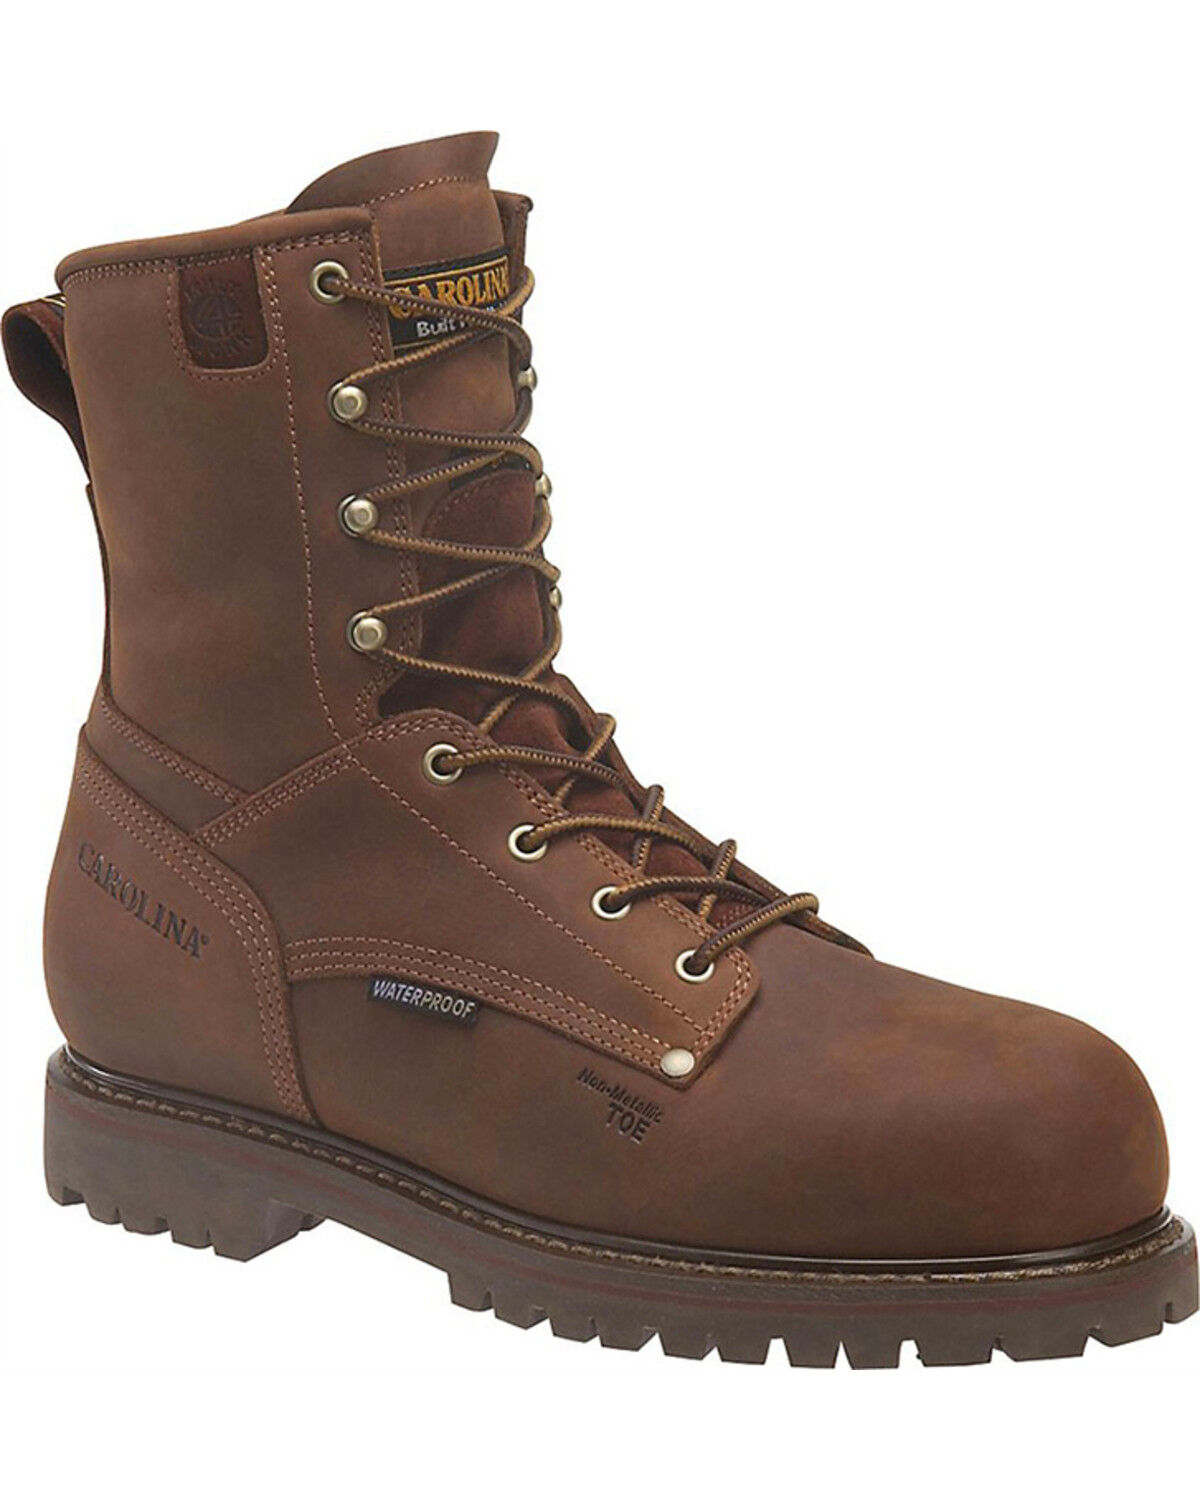 Men's Insulated Work Boots - Boot Barn